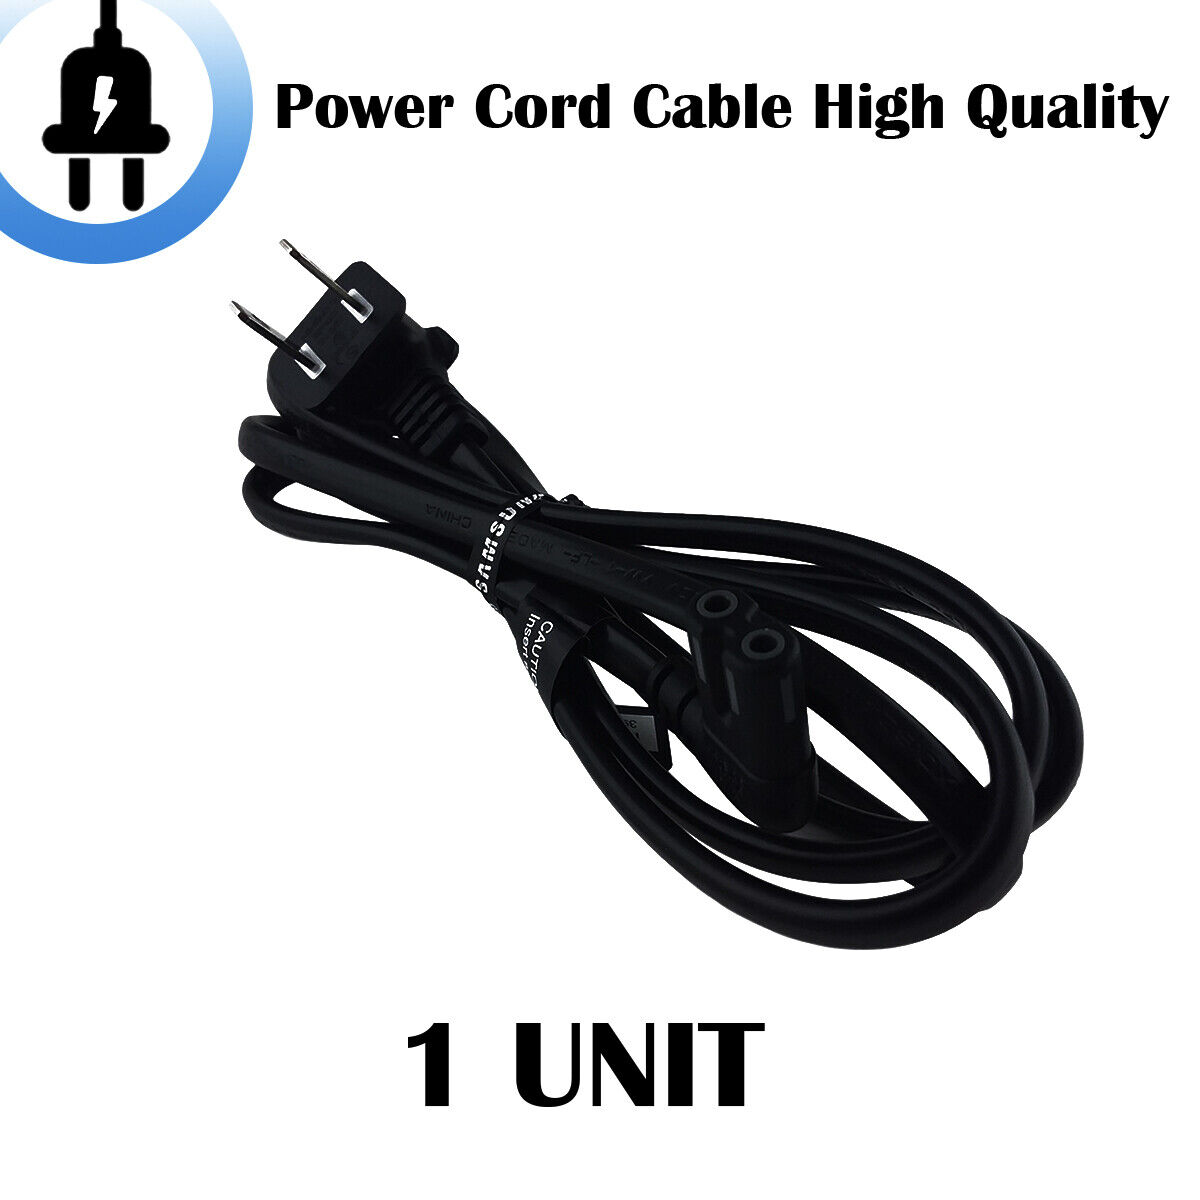 Lot of 1-100 Pieces New Samsung 3903-000853 AC Power Cord/Cable 90° Angled